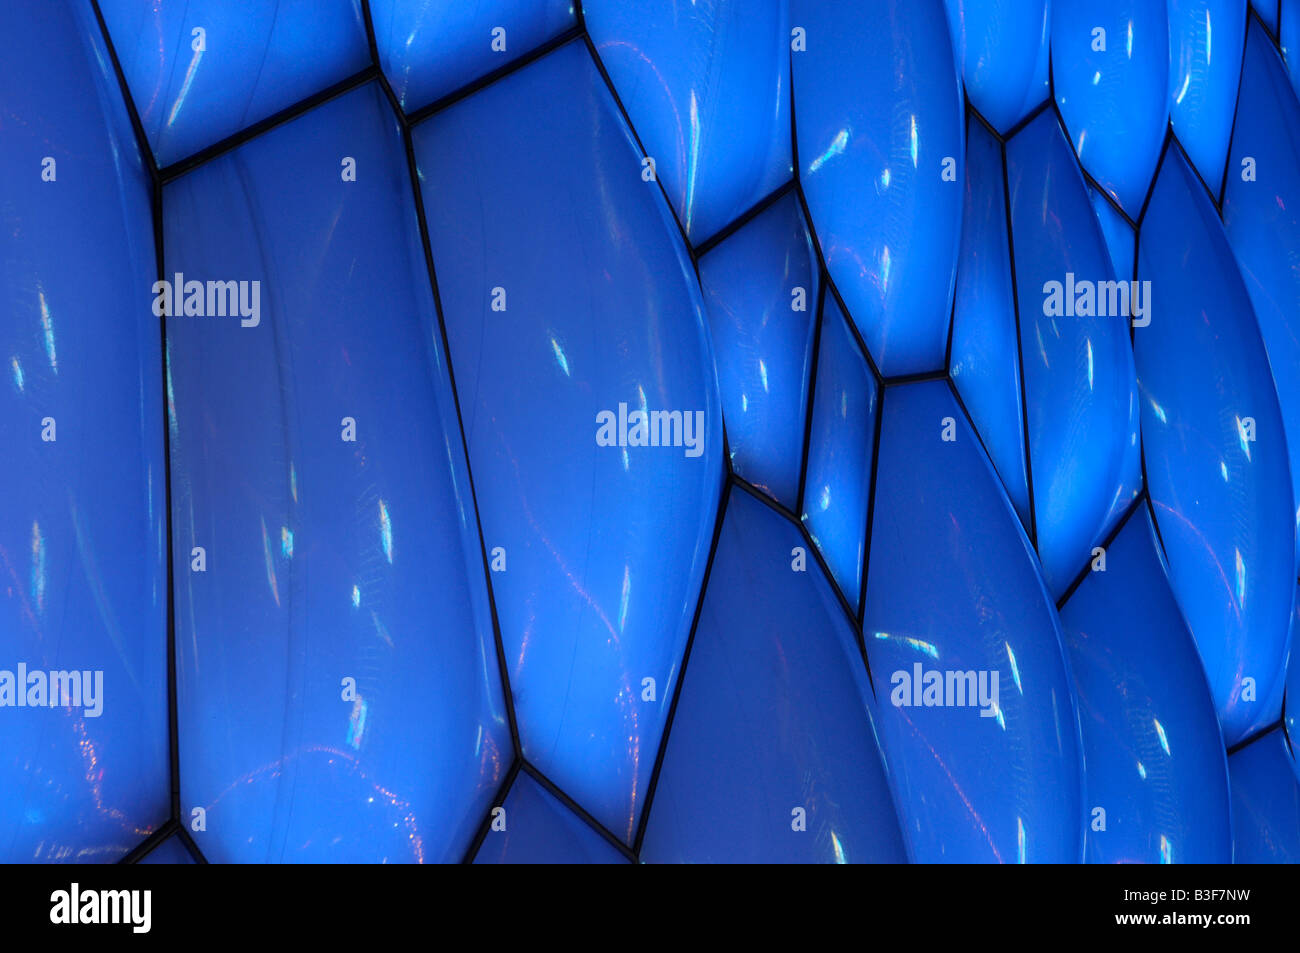 The Water Cube (National Aquatics Stadium) at night during the Beijing 2008 Summer Olympic Games in Beijing, China. Stock Photo